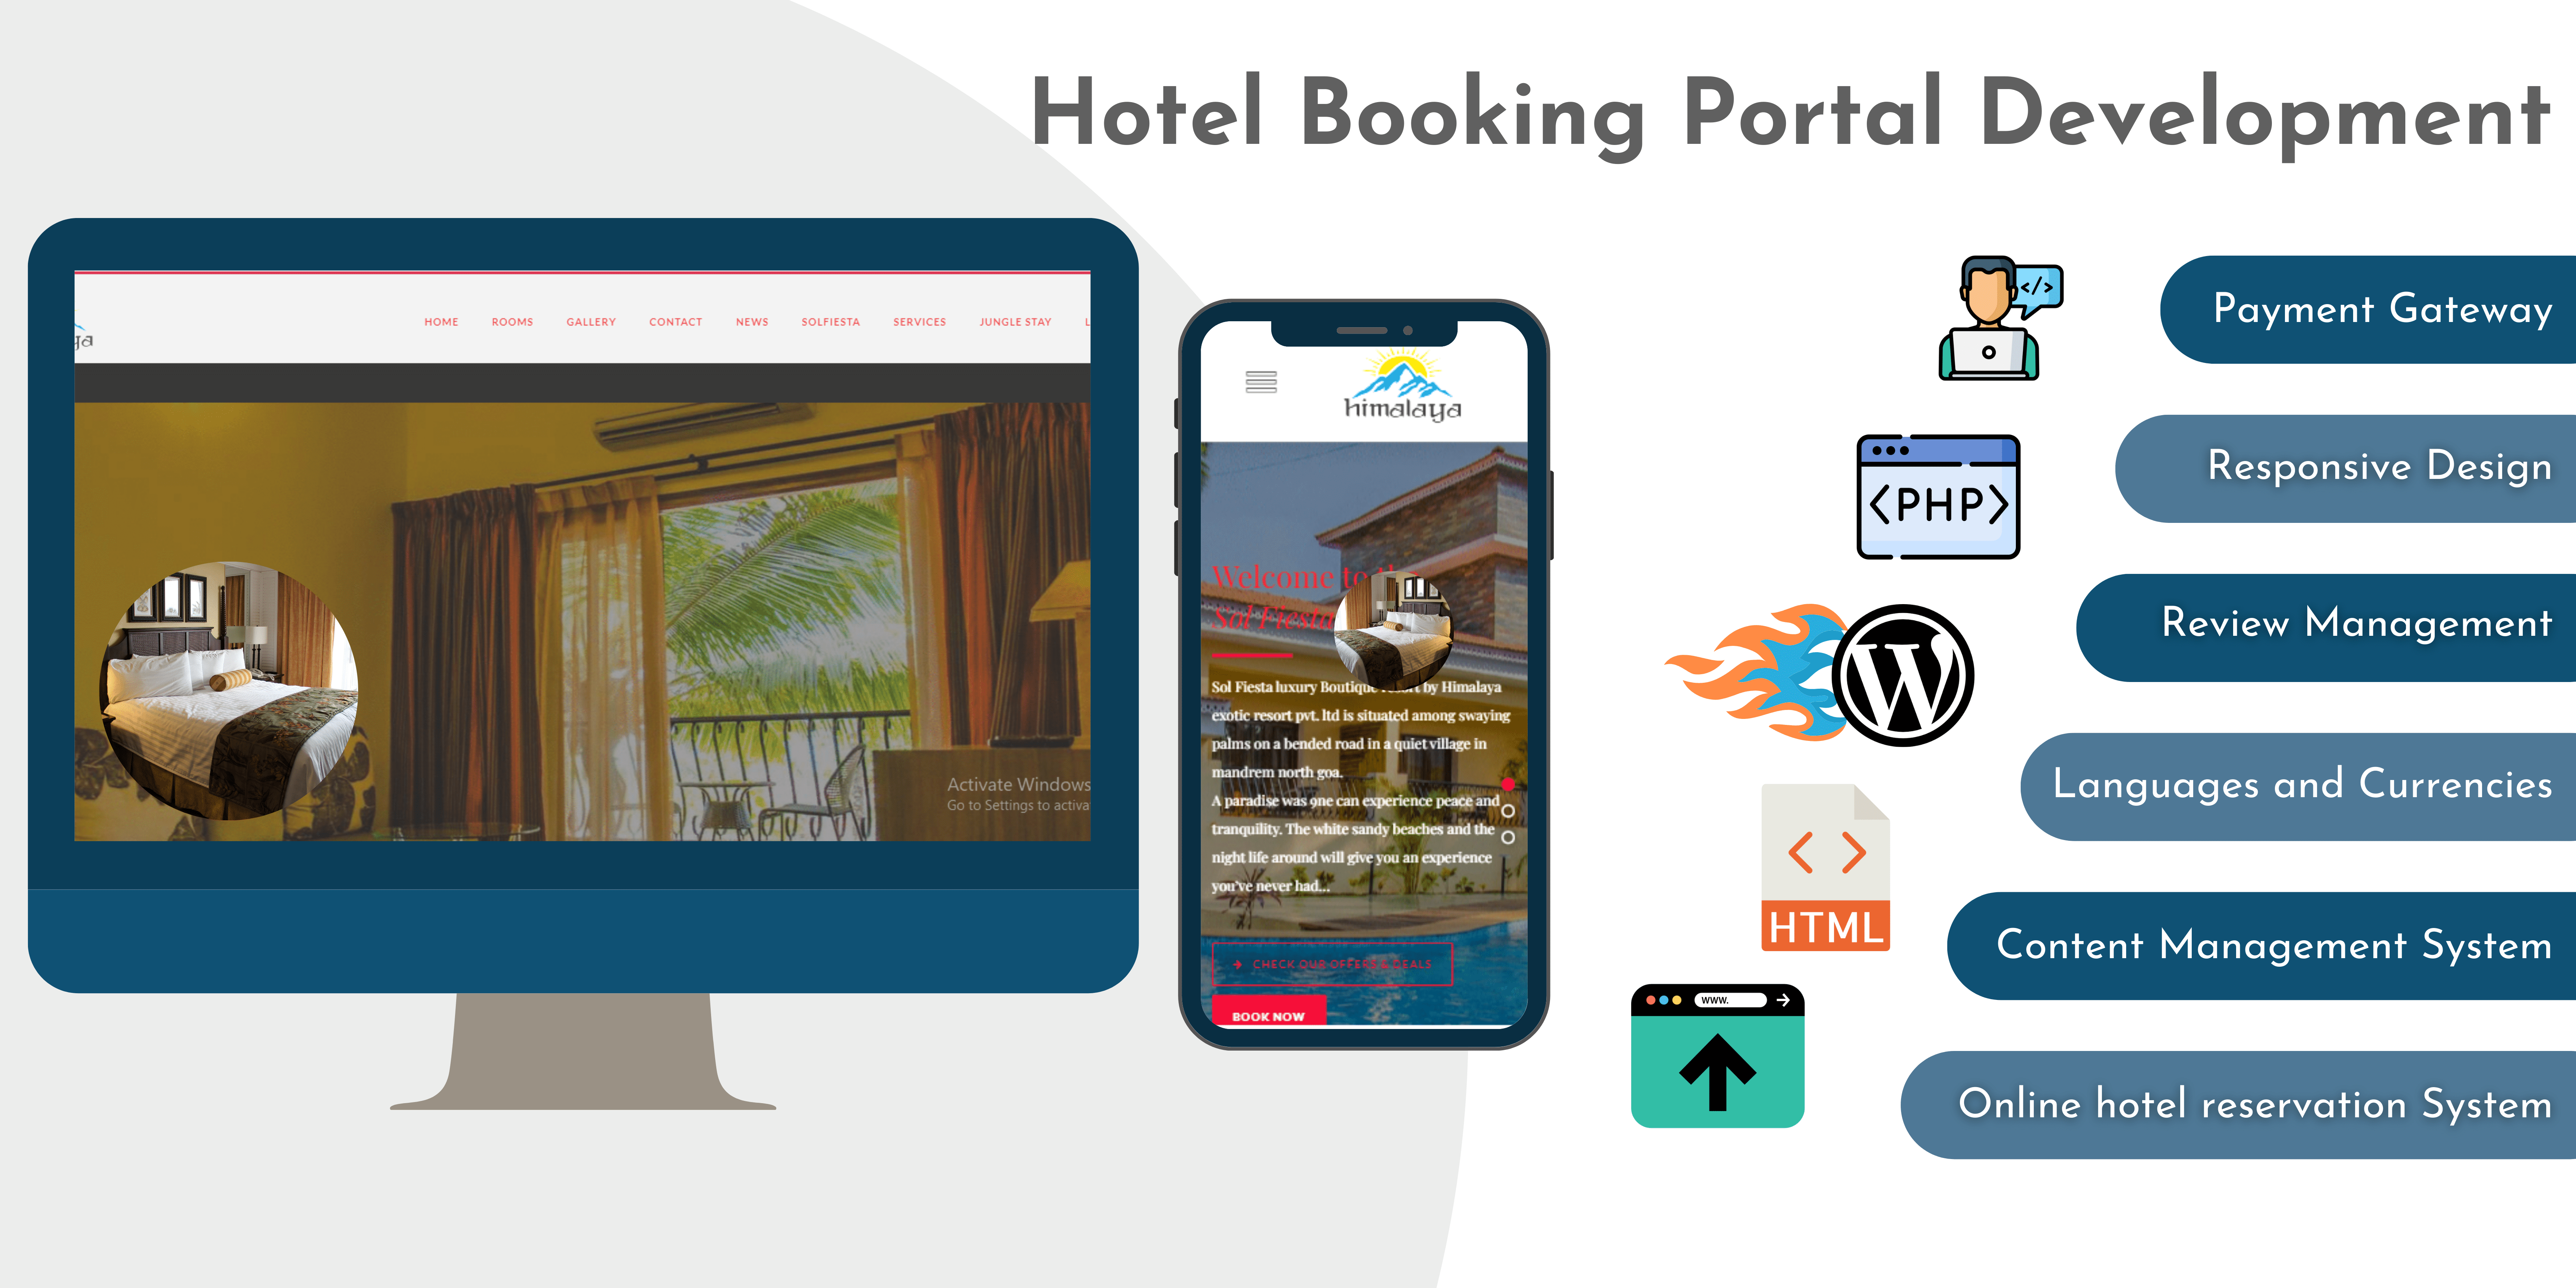 Are you in Hotel industry? Then this Hotel booking website development blog is for you